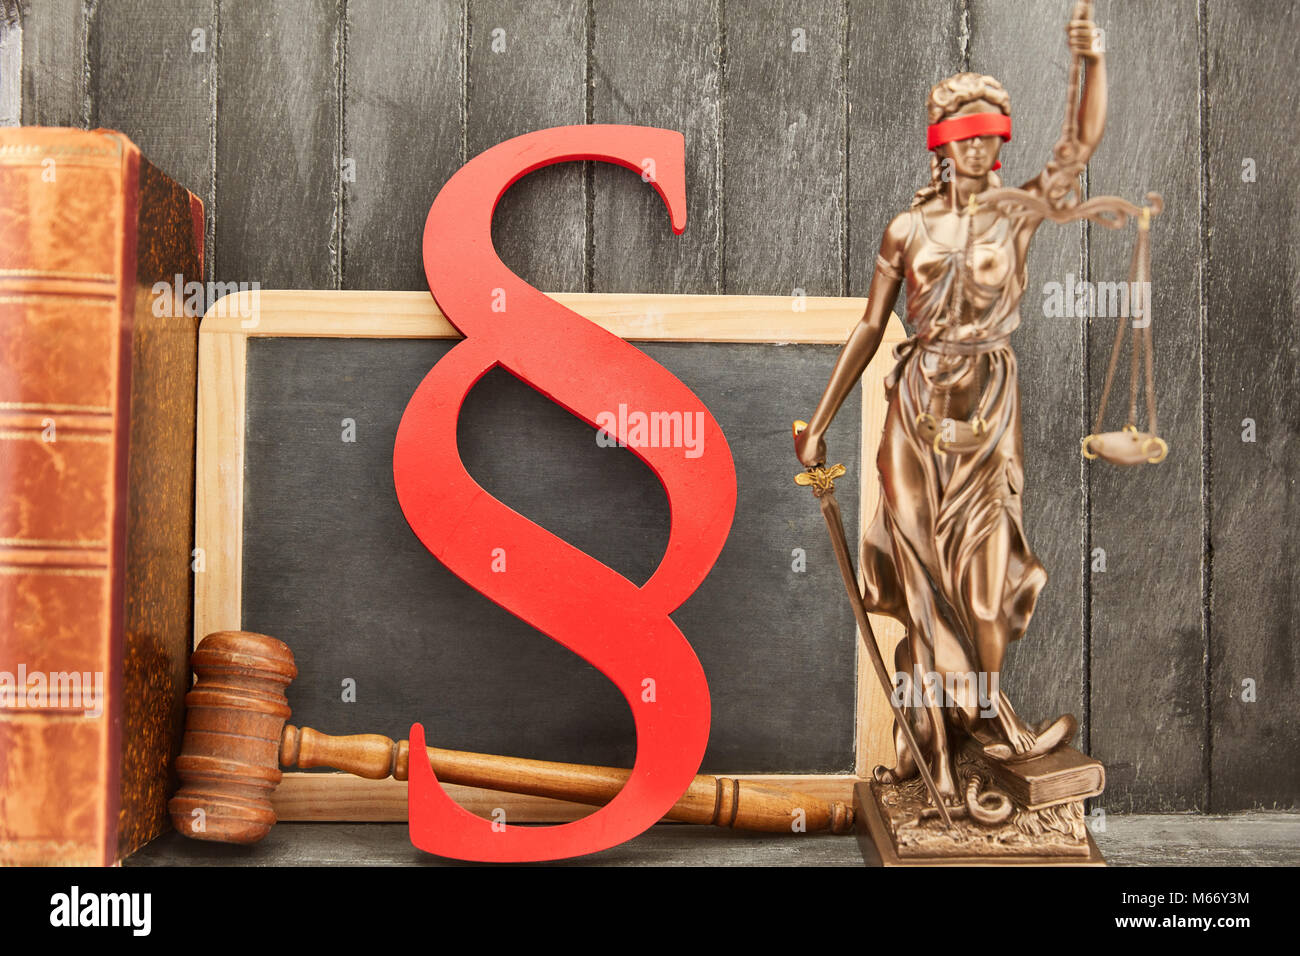 Law Law Justice concept with symbols like Justitia Paragraph and Judge Hammer Stock Photo